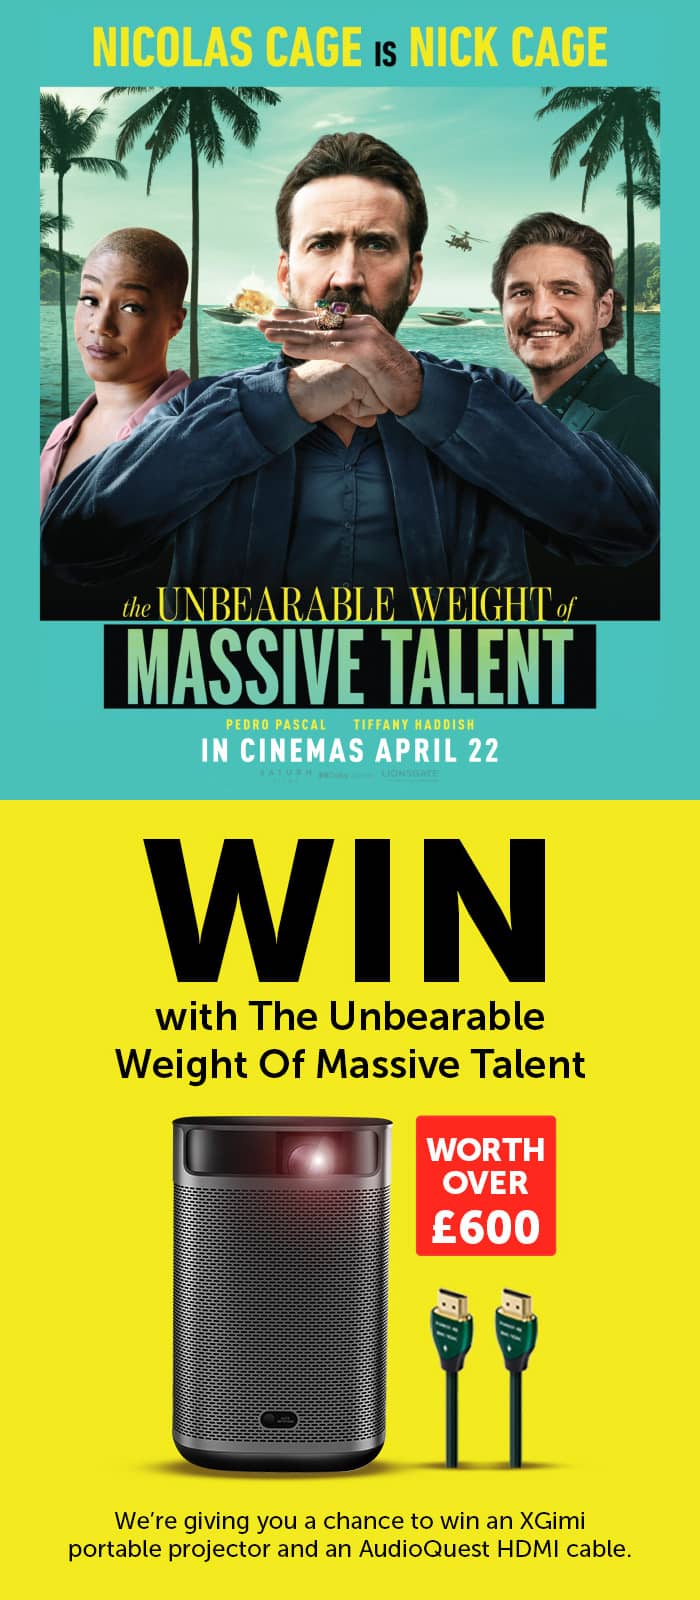 The Unbearable Weight Of Massive Talent